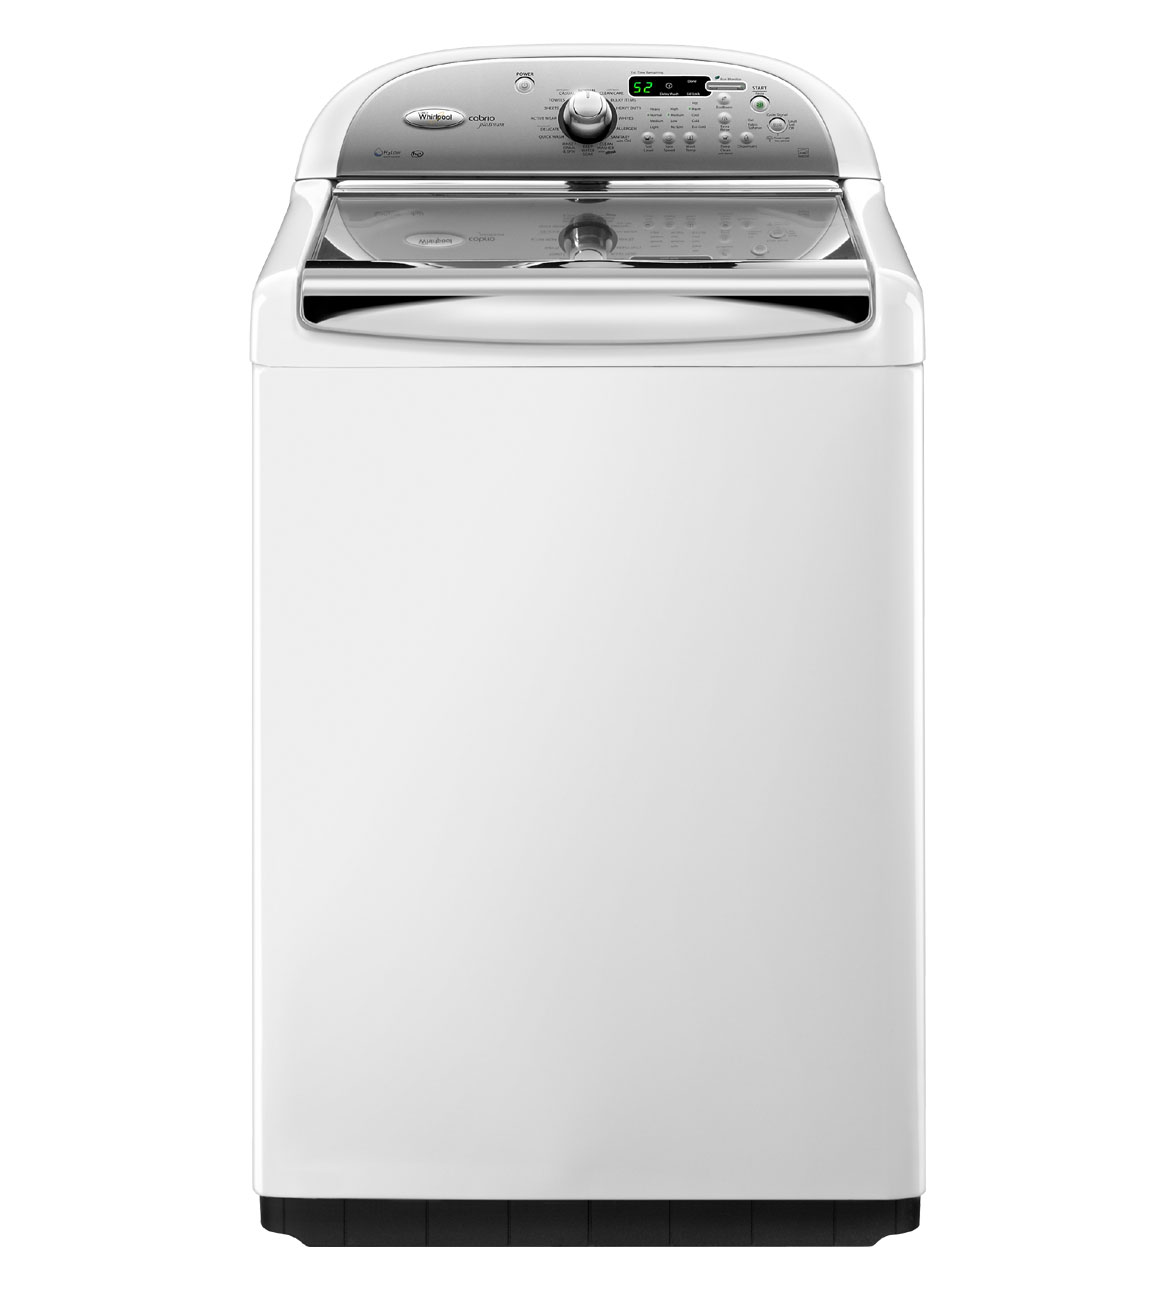 review-of-whirlpool-cabrio-platinum-4-6-cu-ft-high-efficiency-top-load